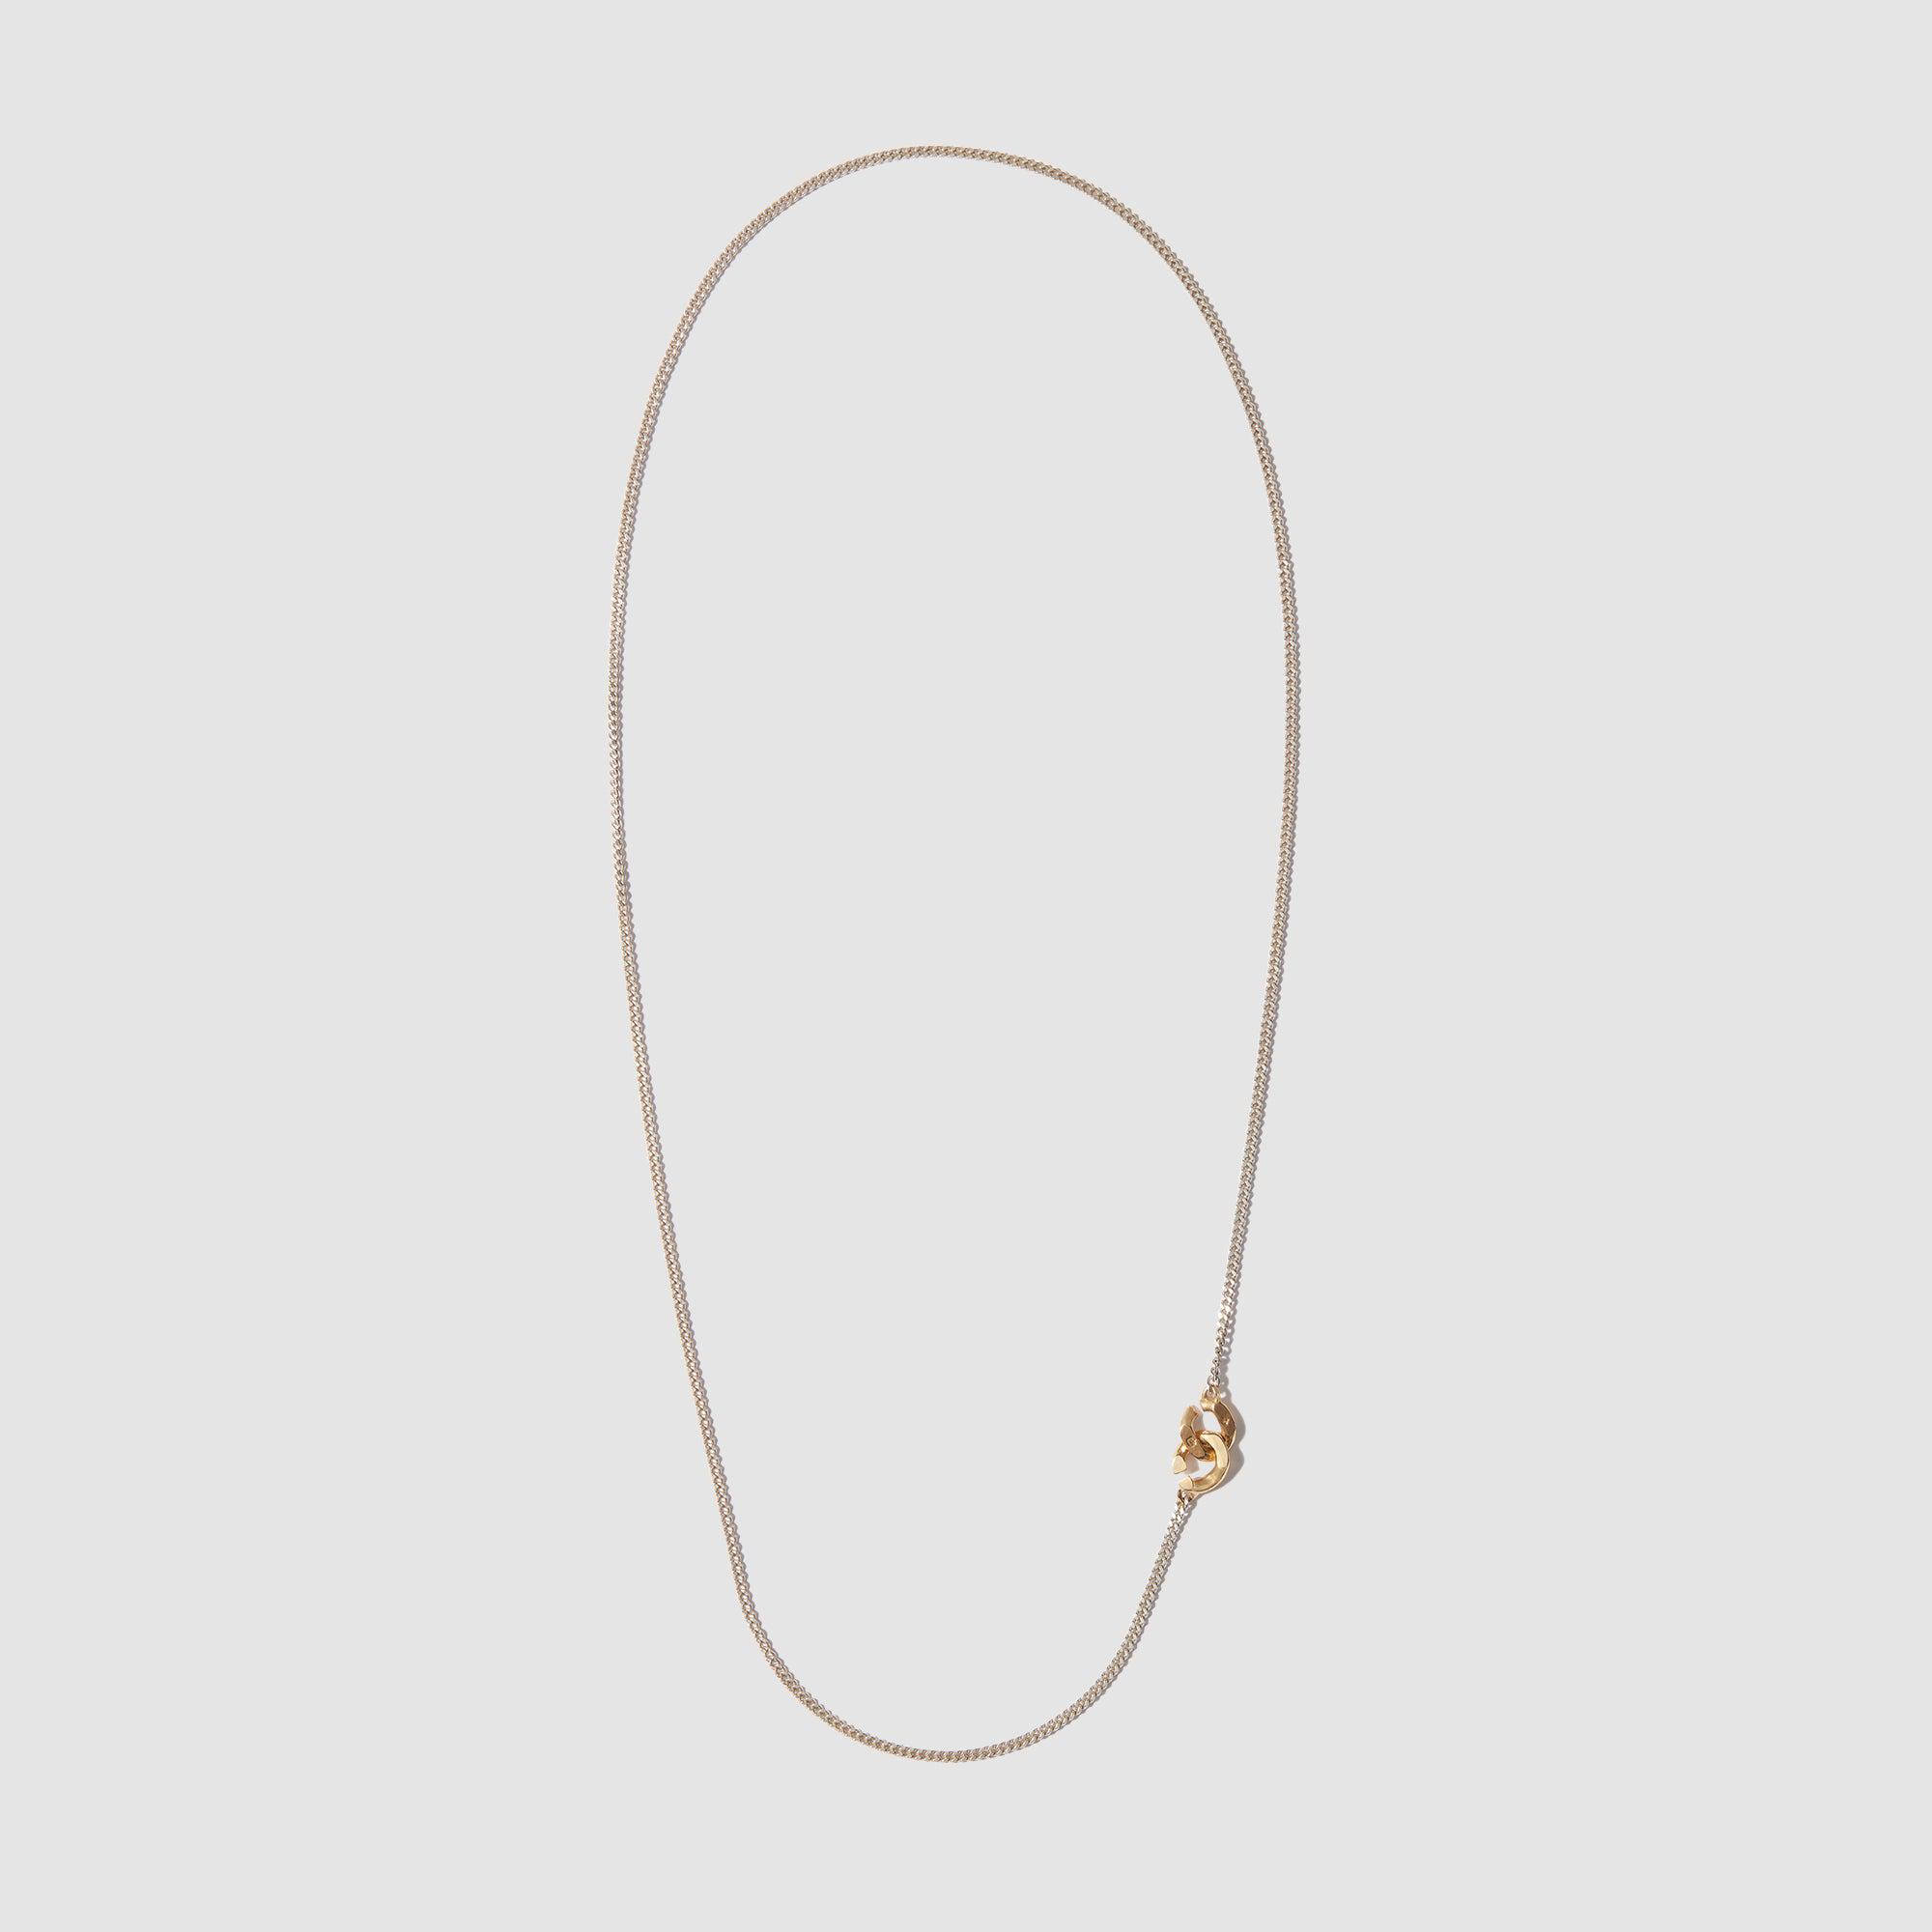 Bunney Chain with Curb Clasp Small (Sterling Silver Yellow Gold) by ANDREW BUNNEY